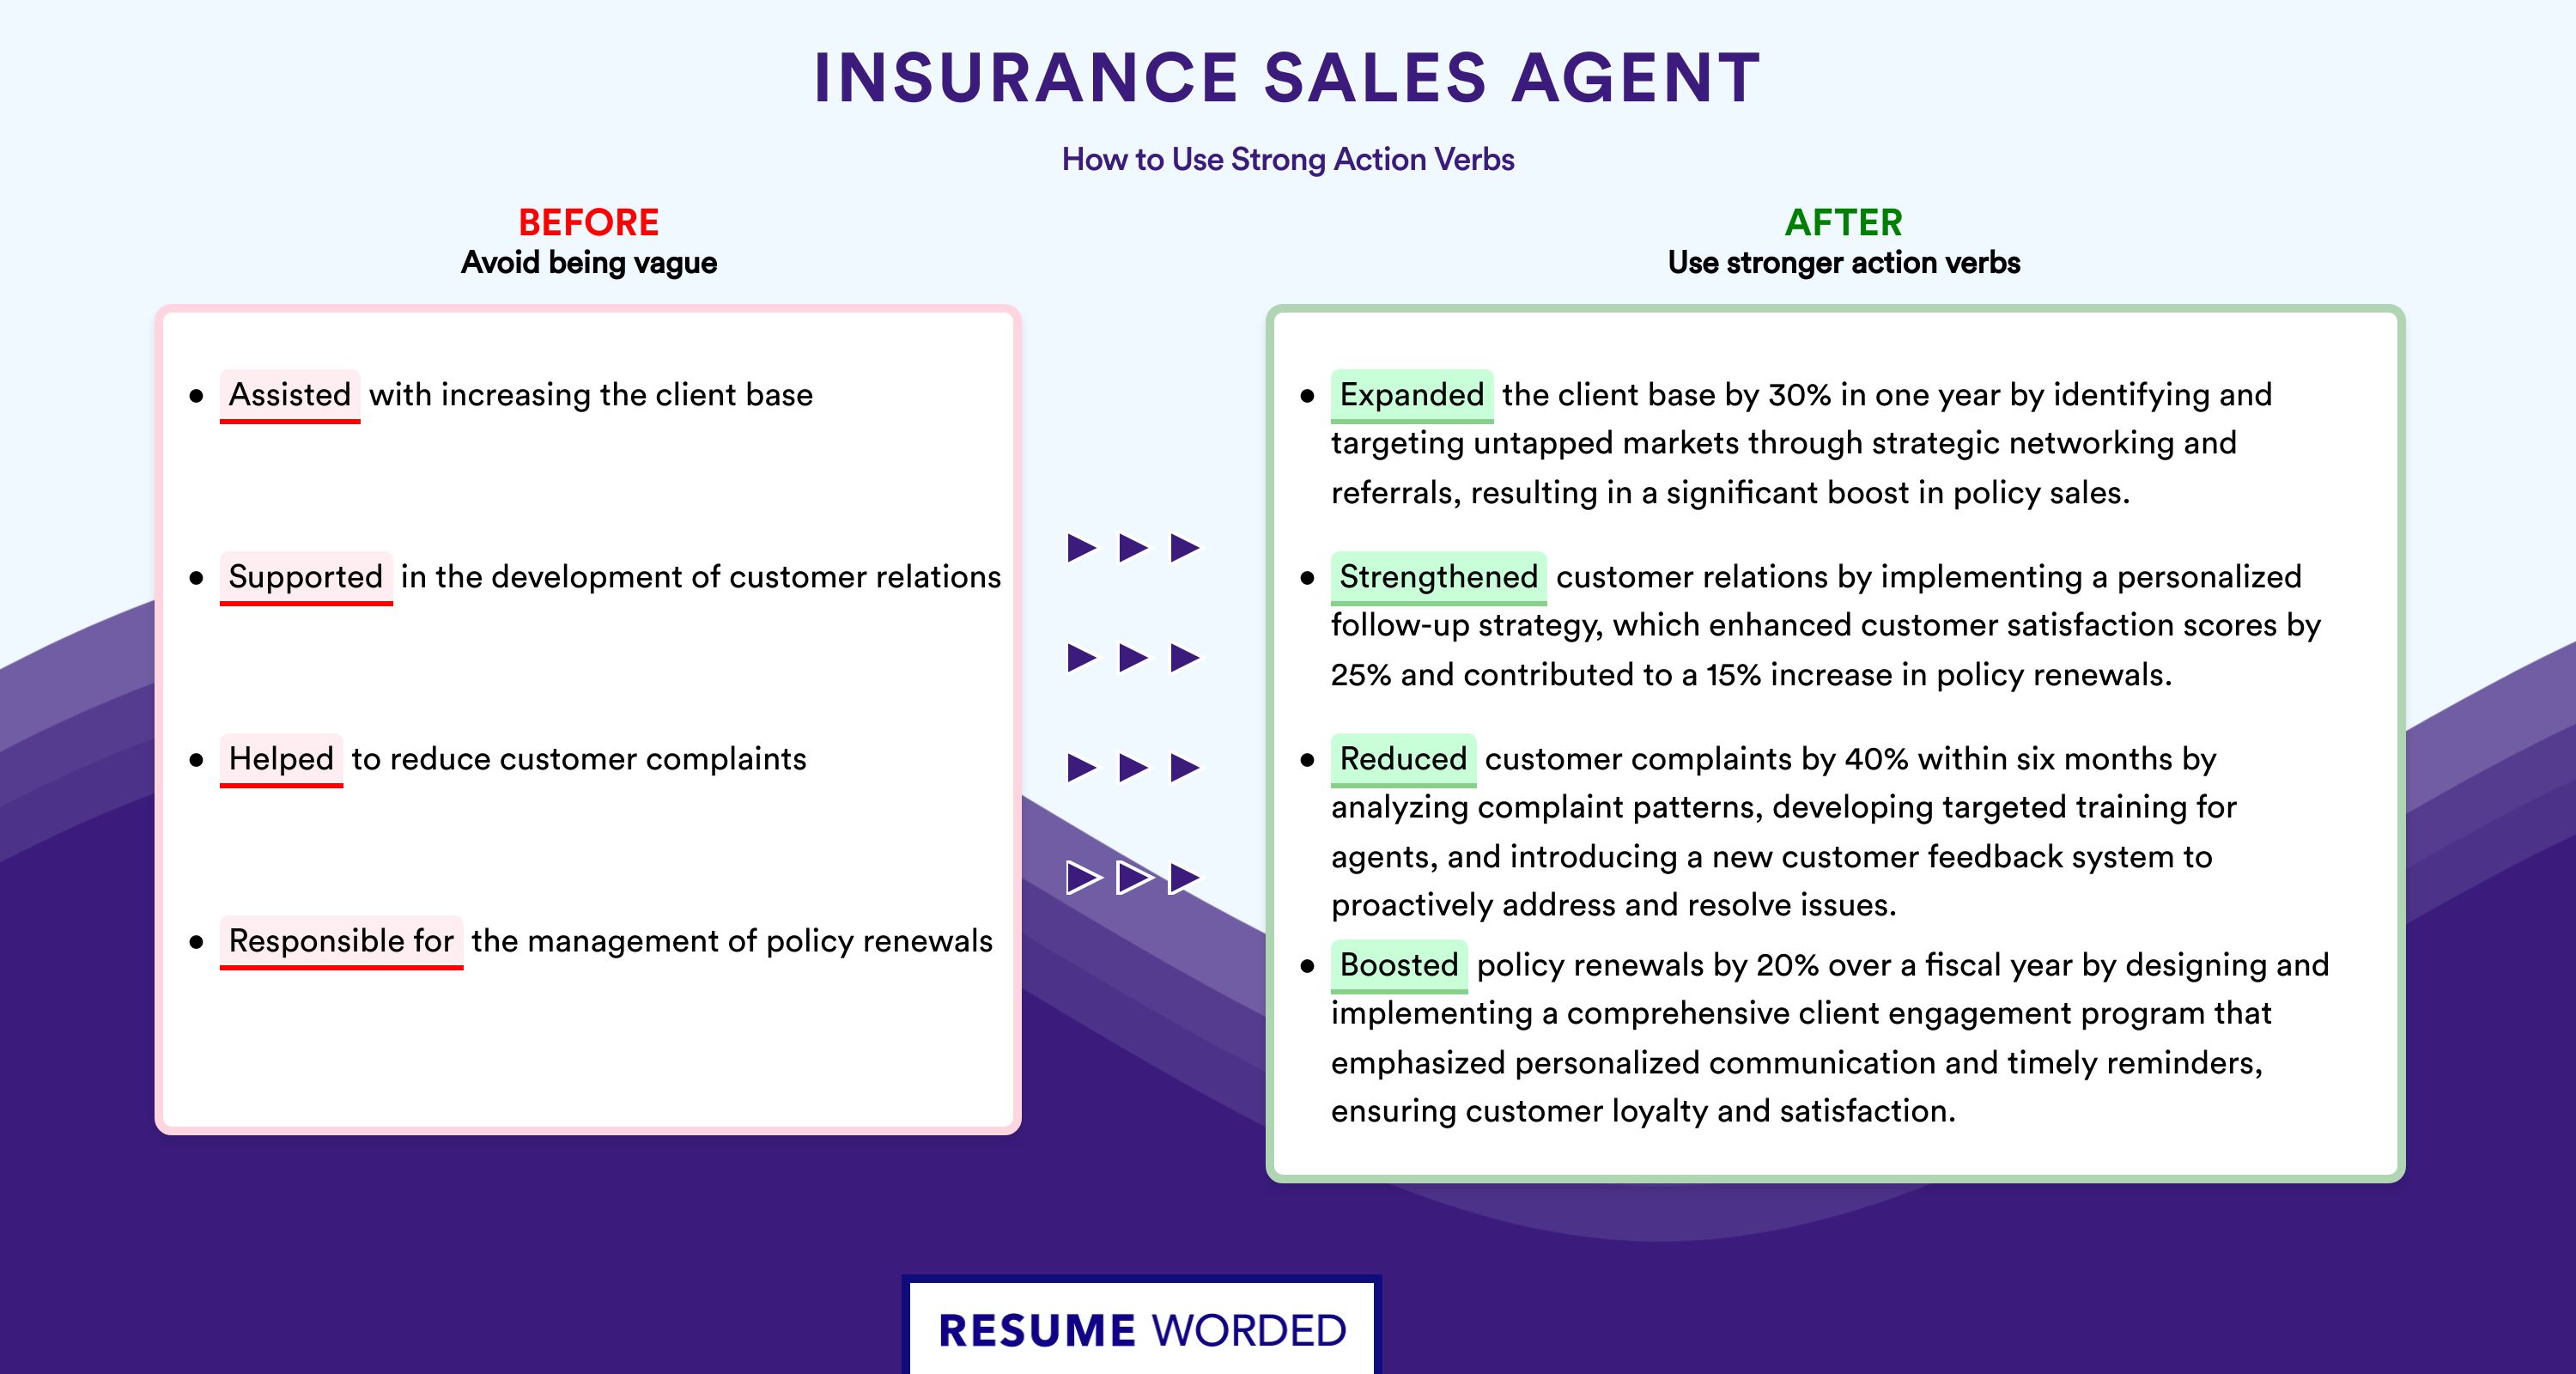 Action Verbs for Insurance Sales Agent